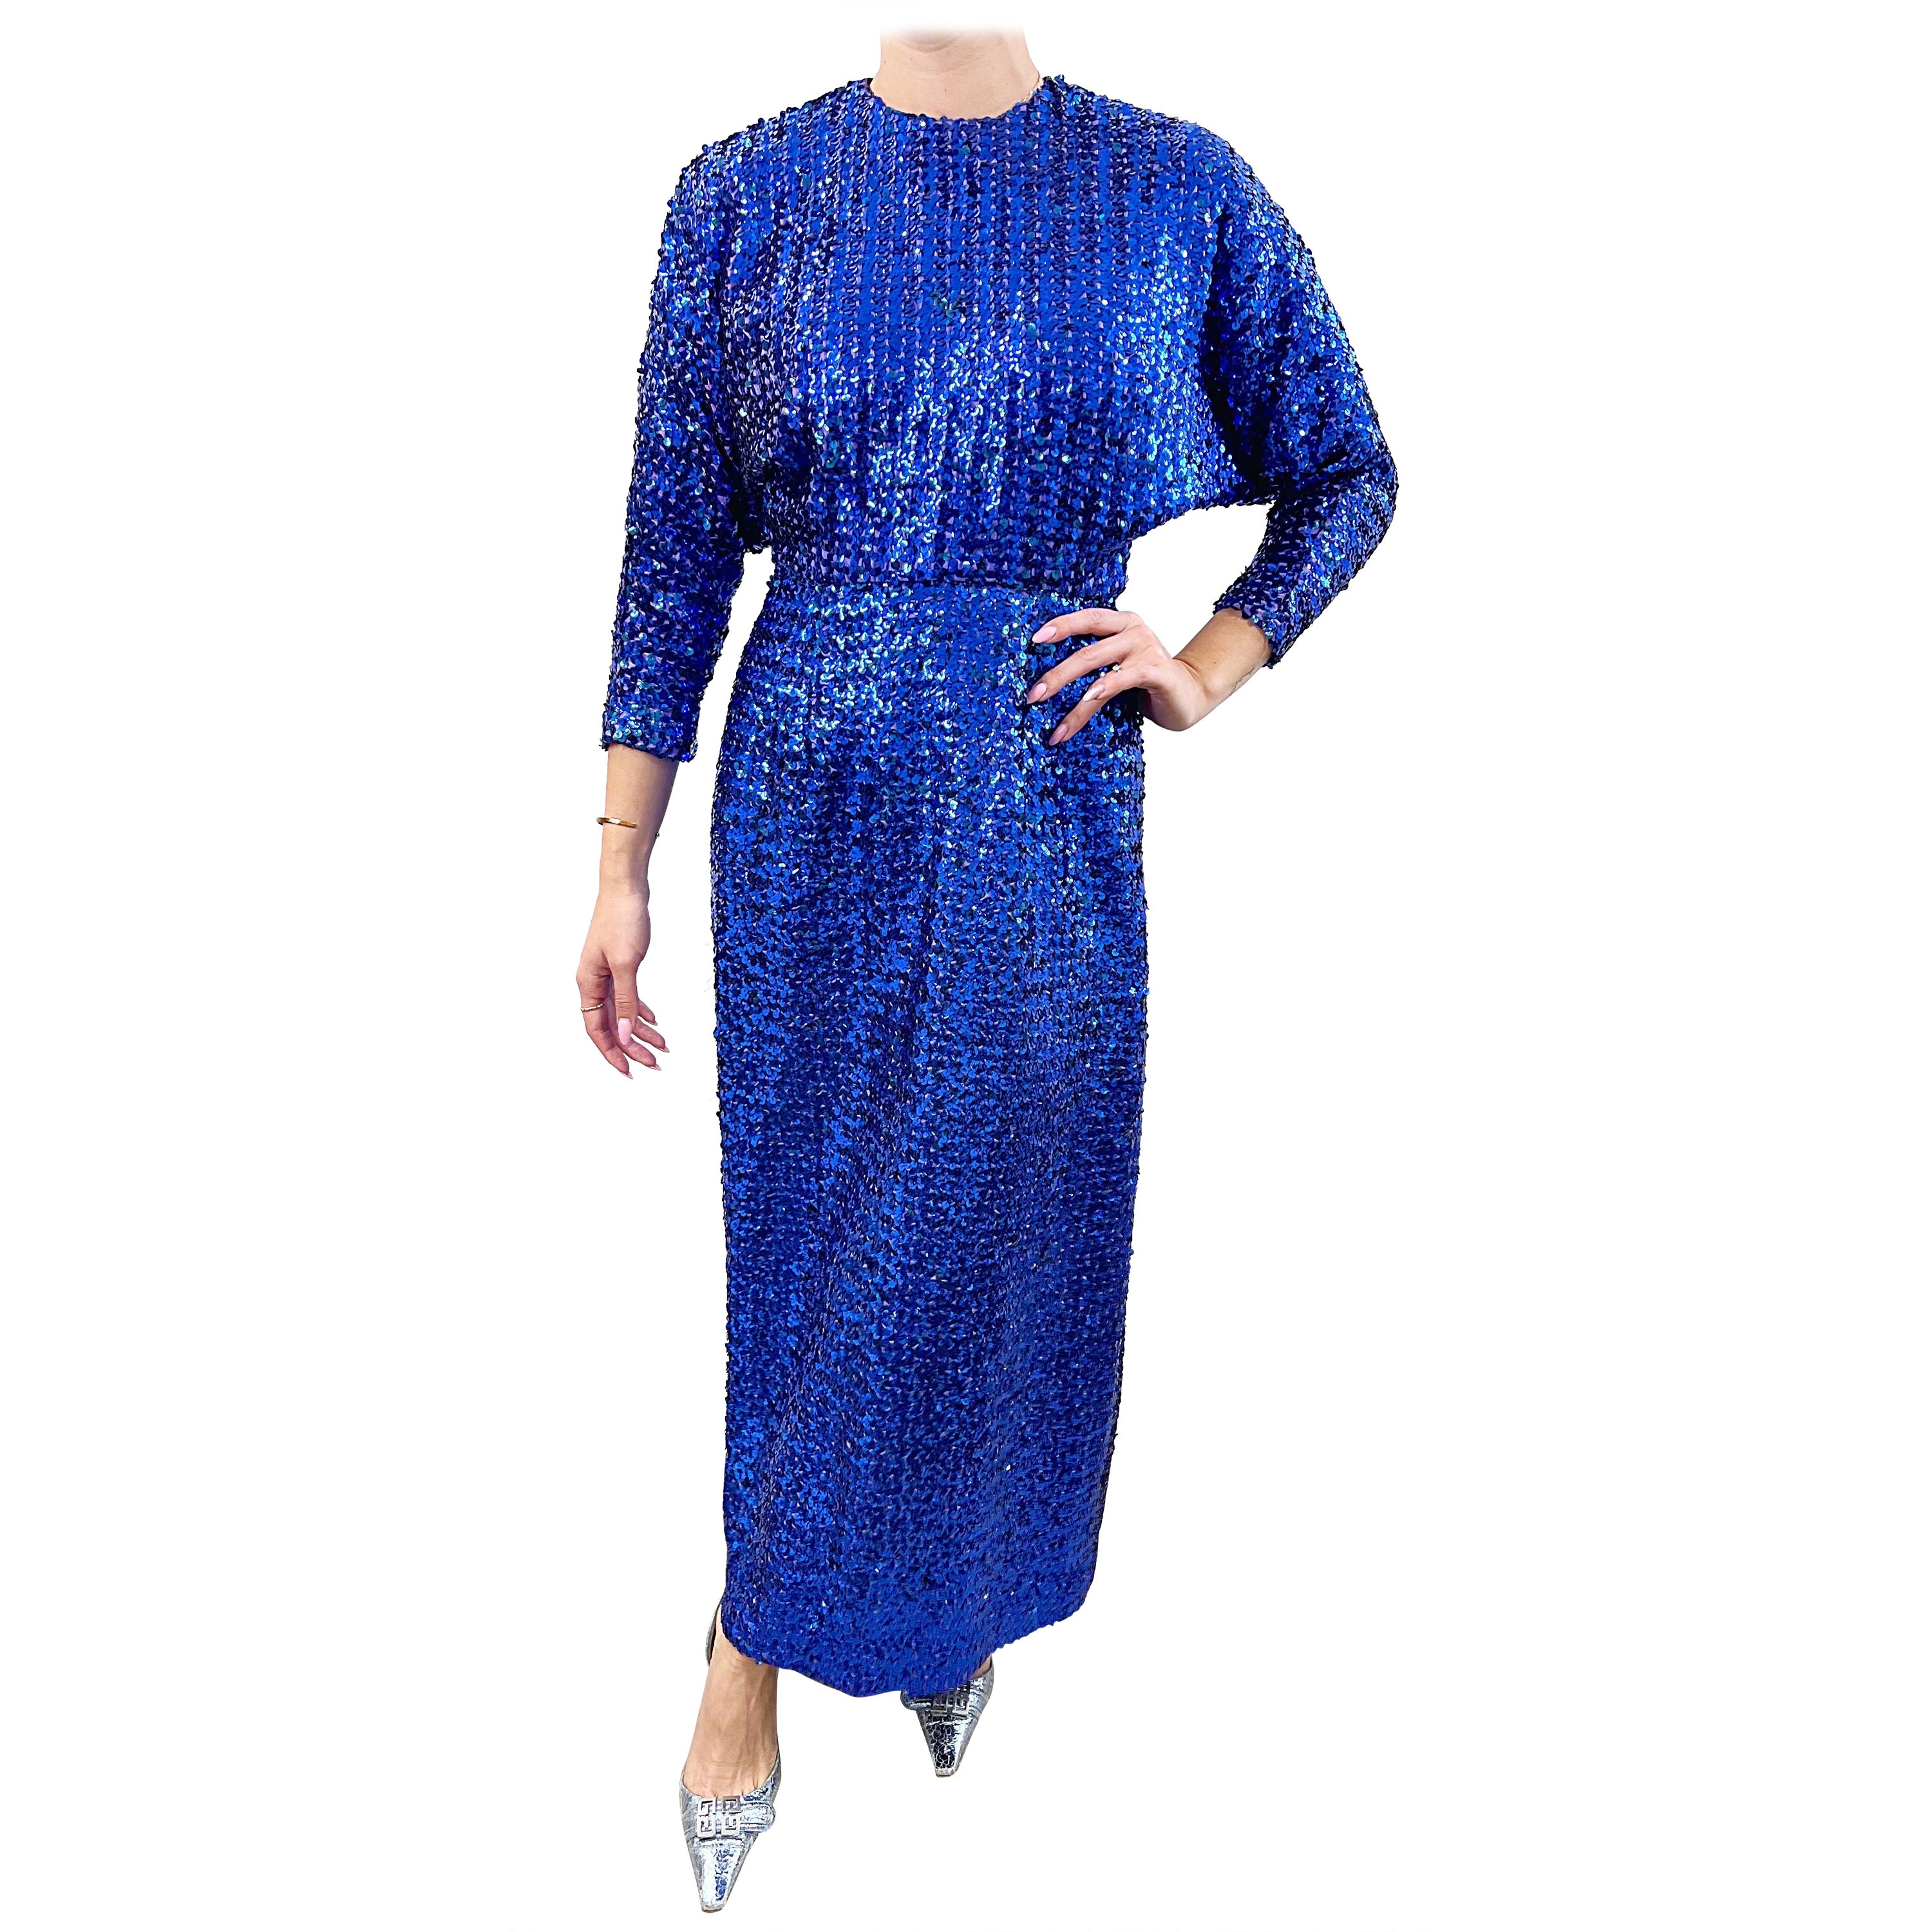 1970s Royal Blue Fully Sequin Dolman Sleeves Vintage 70s Evening Gown Dress  For Sale